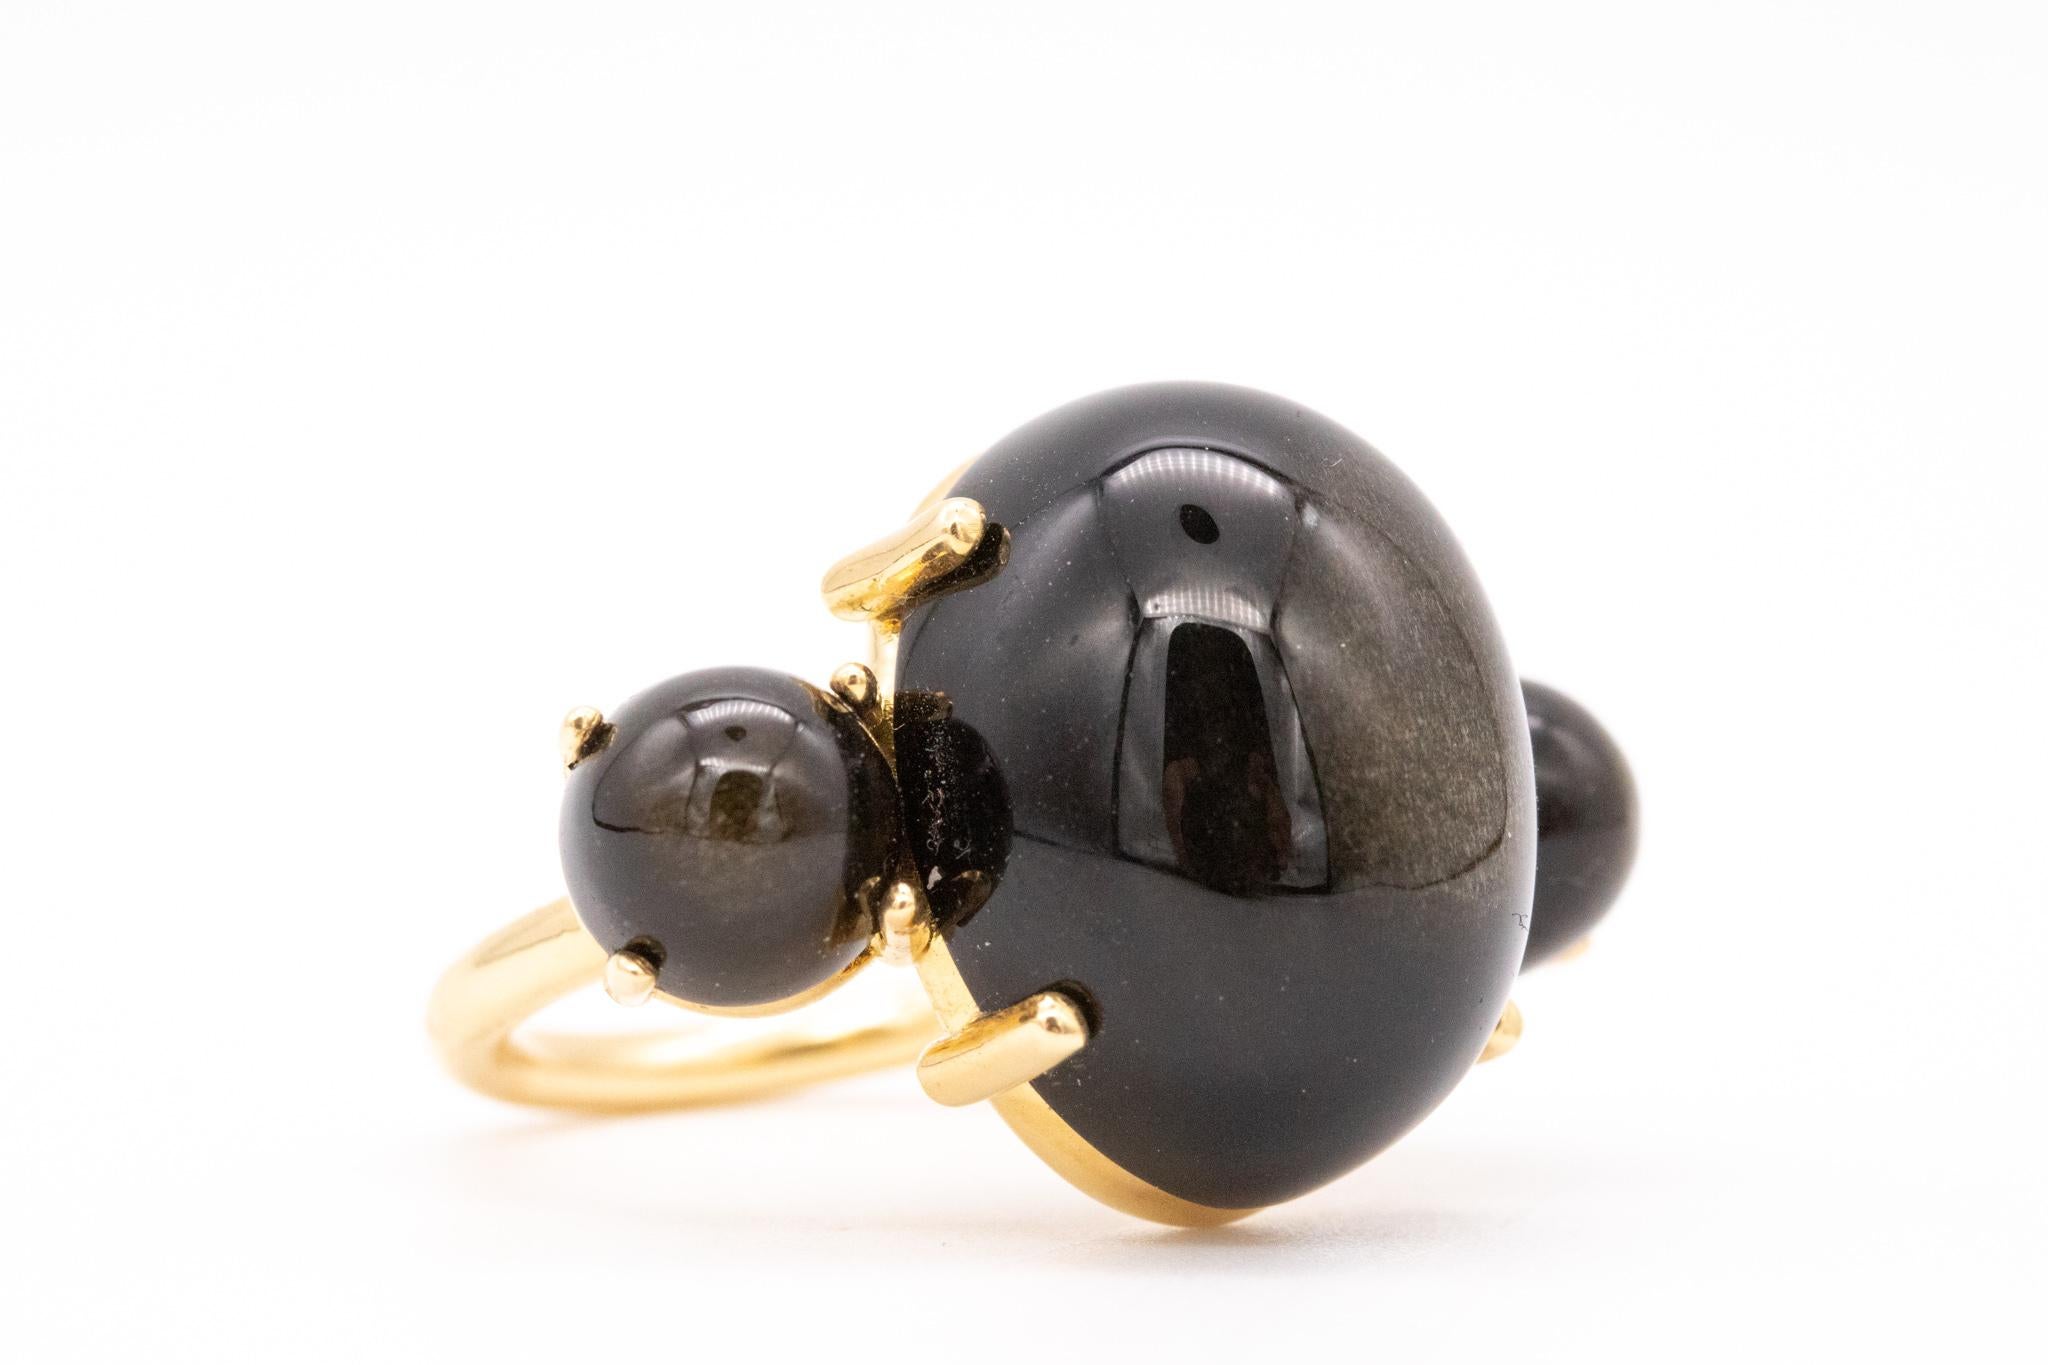 Cocktail ring designed by Paul Morelli.

A modern three-gemstones setting, crafted in solid 18 karats of high polished yellow gold. Mounted with three cabochons cuts of natural black-greyish obsidian, with a combined weight of 26 carats.

Have a